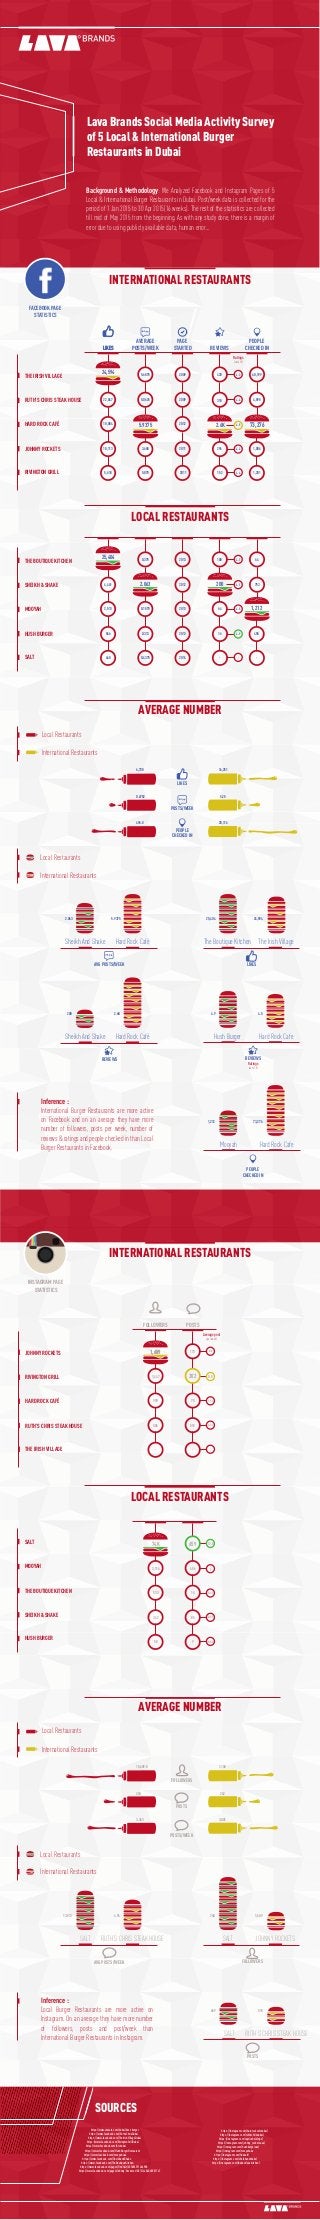 FACEBOOK PAGE
STATISTICS
INSTAGRAM PAGE
STATISTICS
INTERNATIONAL RESTAURANTS
LOCAL RESTAURANTS
Lava Brands Social Media Activity Survey
of 5 Local & International Burger
Restaurants in Dubai
Background & Methodology: We Analyzed Facebook and Instagram Pages of 5
Local & International Burger Restaurants in Dubai. Post/week data is collected for the
period of 1 Jan 2015 to 30 Apr 2015(16 weeks). The rest of the statistics are collected
till mid of May 2015 from the beginning. As with any study done, there is a margin of
error due to using publicly available data, human error...
THE IRISH VILLAGE
RUTH'S CHRIS STEAK HOUSE
HARD ROCK CAFÉ
LIKES
AVERAGE
POSTS/WEEK
Ratings
(out of 5)
PAGE
STARTED REVIEWS
PEOPLE
CHECKED IN
5.6875 2009 60,199
4,898
1,006
73,276
420
3185.062522,847
18,084
10,113
5,618
3.688
5.875 2011 152 1,201
2009
2012
2011 294
4.3
4.4
JOHNNY ROCKETS
RIVINGTON GRILL
Local Restaurants
Local Restaurants
Sheikh And Shake Hard Rock Café
24,594
4.5
4.2
4.4
AVERAGE NUMBER
LIKES
LIKES
POSTS/WEEK
AVG POSTS/WEEK
PEOPLE
CHECKED IN
6,738 16,251
0.6752 5.25
496.8
2.063 5.9375
28,116
International Restaurants
International Restaurants
Sheikh And Shake Hard Rock Café
200 2.6K
The Boutique Kitchen The Irish Village
24,59425,404
LIKES
Hush Burger Hard Rock Cafe
4.54.9
REVIEWS REVIEWS
Ratings
(out of 5)
Mooyah Hard Rock Cafe
73,2761,212
5.9375 2.6K
THE BOUTIQUE KITCHEN
SHEIKH & SHAKE
MOOYAH
0.375 2013 64
753
1,212
100
2002.0634,461
2,513 0.1875
846
468
0.313
0.4375 2014 - -
2012
2013 64
2013 16 455
4.7
4.1
HUSH BURGER
SALT
SALT
MOOYAH
THE BOUTIQUE KITCHEN
SHEIKH & SHAKE
HUSH BURGER
25,404
4.5
4.9
-
LOCAL RESTAURANTS
INTERNATIONAL RESTAURANTS
JOHNNY ROCKETS
RIVINGTON GRILL
HARD ROCK CAFÉ
FOLLOWERS POSTS
RUTH'S CHRIS STEAK HOUSE
THE IRISH VILLAGE
Inference :
International Burger Restaurants are more active
on Facebook and on an average they have more
number of followers, posts per week, number of
reviews & ratings and people checked in than Local
Burger Restaurants in Facebook.
PEOPLE
CHECKED IN
Local Restaurants
Local Restaurants
SALT
SALT
SALTRUTH’S CHRIS STEAK HOUSE
RUTH’S CHRIS STEAK HOUSE
JOHNNY ROCKETS
AVERAGE NUMBER
15,609.8 1,158
245 242
3.363
13.813 4.94
3.001
International Restaurants
International Restaurants
659 515
1,68974K
Inference :
Local Burger Restaurants are more active on
Instagram. On an average they have more number
of followers, posts and post/week than
International Burger Restaurants in Instagram.
FOLLOWERS
POSTS
FOLLOWERS
POSTS
POSTS/WEEK
AVG POSTS/WEEK
SOURCES
https://instagram.com/hardrockcafedubai/
https://instagram.com/ruthschrisdubai/
https://instagram.com/capriceholdings/
https://instagram.com/johnny_rocketsuae/
https://instagram.com/hushburgeruae/
https://instagram.com/mooyahuae
https://instagram.com/ﬁndsalt/
https://instagram.com/sheikhandshake/
https://instagram.com/theboutiquekitchen/
https://www.zomato.com/dubai/best-burger
https://www.facebook.com/RuthsChrisDubai
https://www.facebook.com/TheIrishVillageDubai
https://www.facebook.com/RivingtonGrillDubai
https://www.facebook.com/hrcdubai
https://www.facebook.com/HushBurgerRestaurant
https://www.facebook.com/mooyahuae
https://www.facebook.com/SheikhandShake
https://www.facebook.com/TheBoutiqueKitchen
https://www.facebook.com/pages/FindSalt/653686391404980
https://www.facebook.com/pages/Johnny-Rockets-UAE/214404068581747
-
1,447
990
506
1,689 0.0
1.56
4.94
-
Average post
(per week)
1,689
-
202
78
515
173
5.5
58
3,116
533
342
74K 13.8
0.25
0.69
0.069
456
16
85
659
2
 